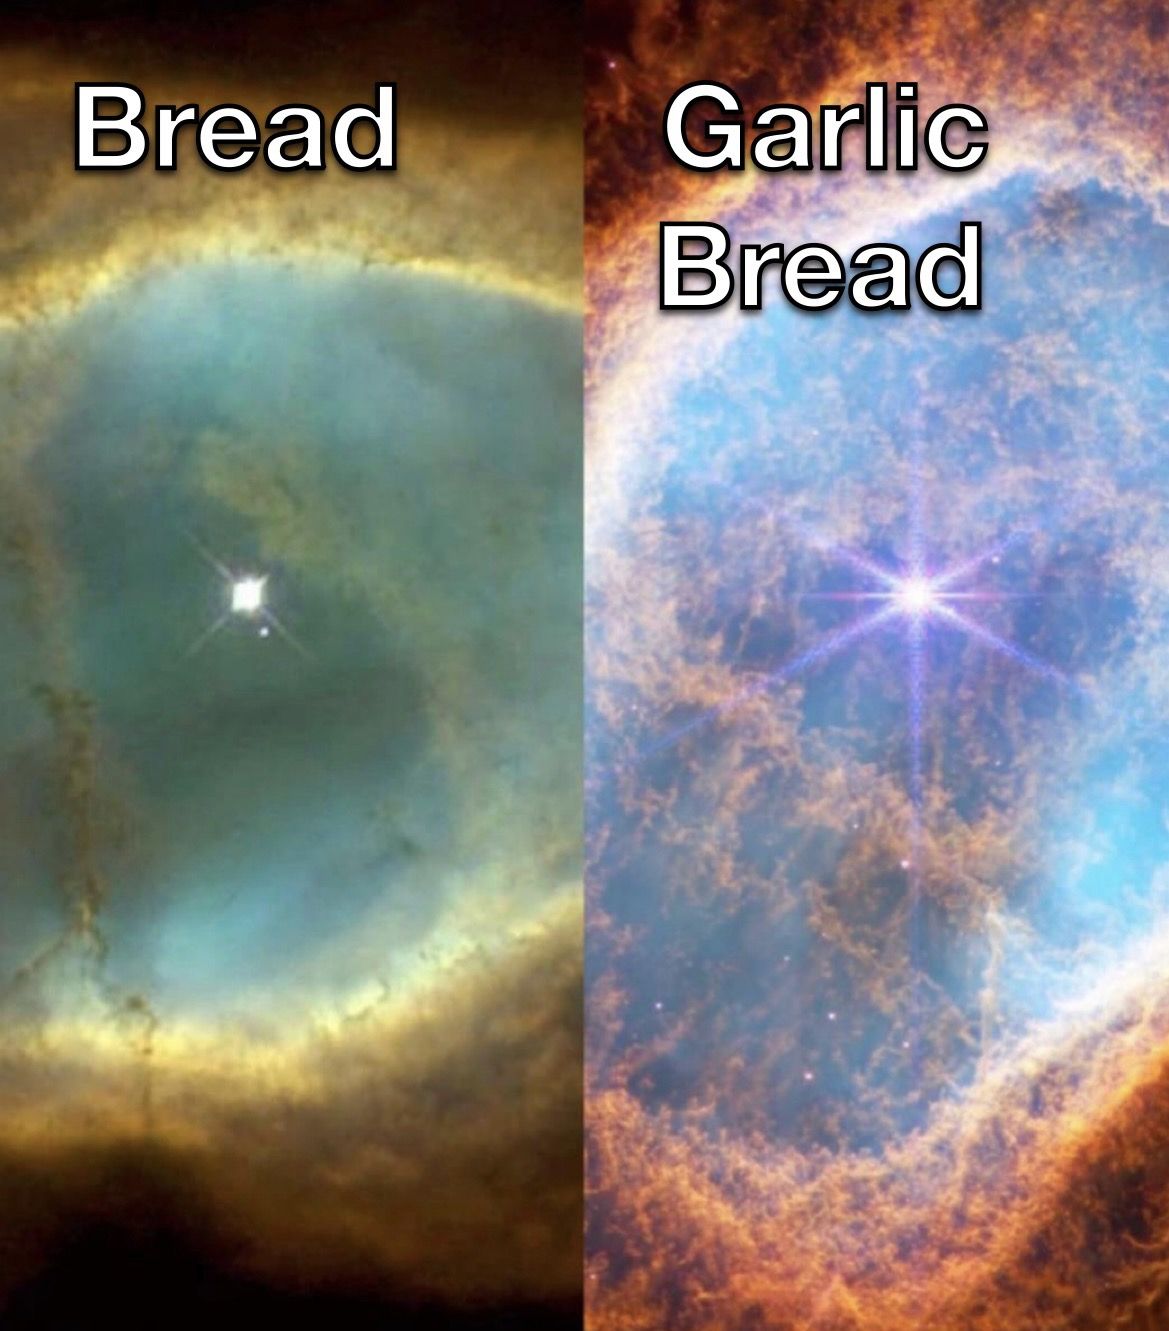 Garlic bread is out of this world